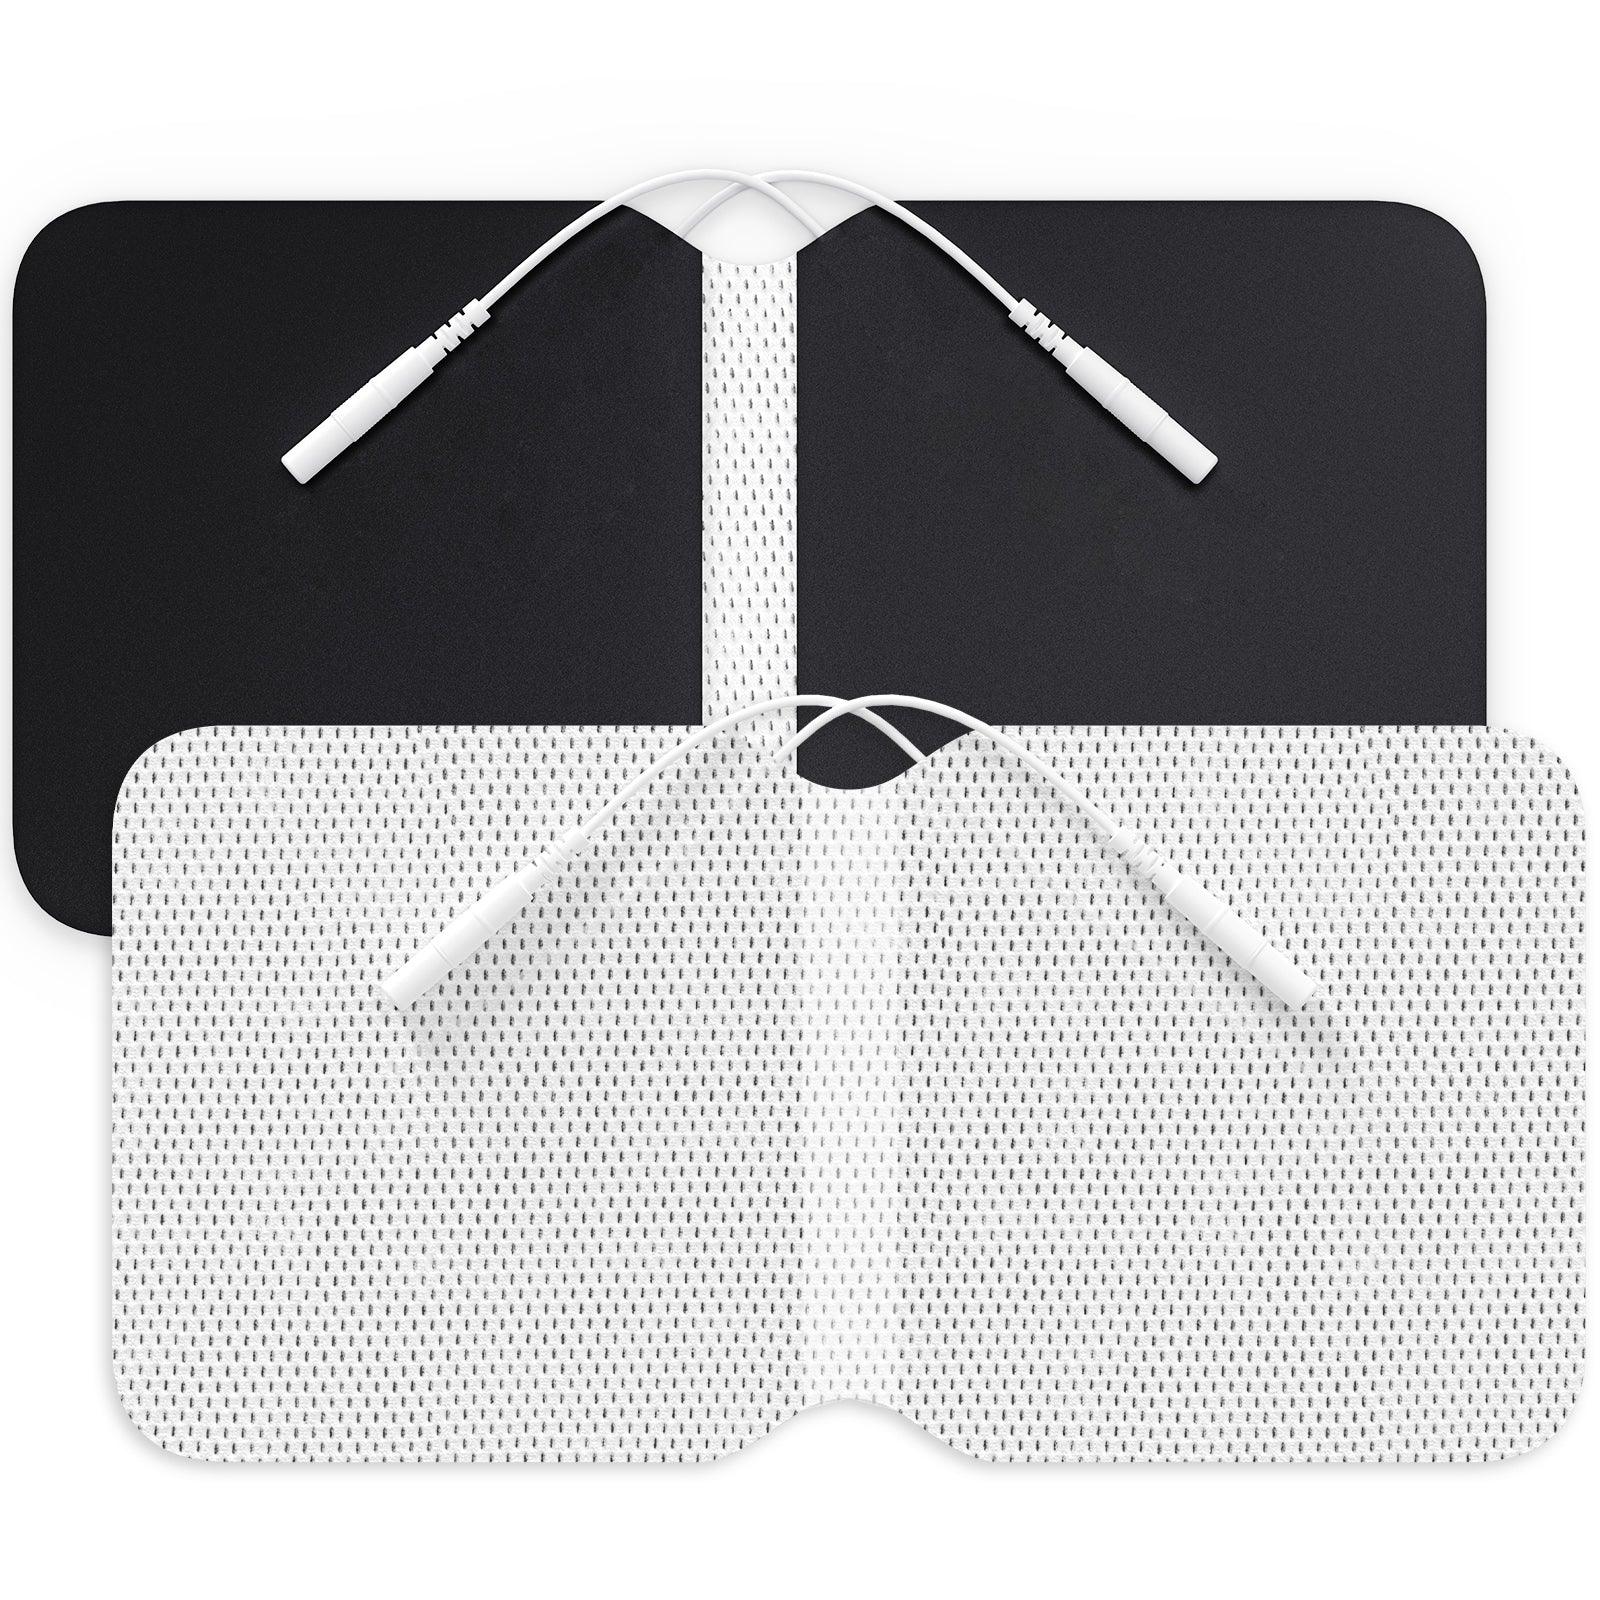 http://auvonhealth.com/cdn/shop/files/auvon-tens-unit-replacement-pads-4-x-8-large-butterfly-shaped-electrode-pads-for-backlower-back-pain-reusable-latex-free-stim-pads-with-self-adhesion-for-muscle-stimulation-and-therap.jpg?v=1686019929